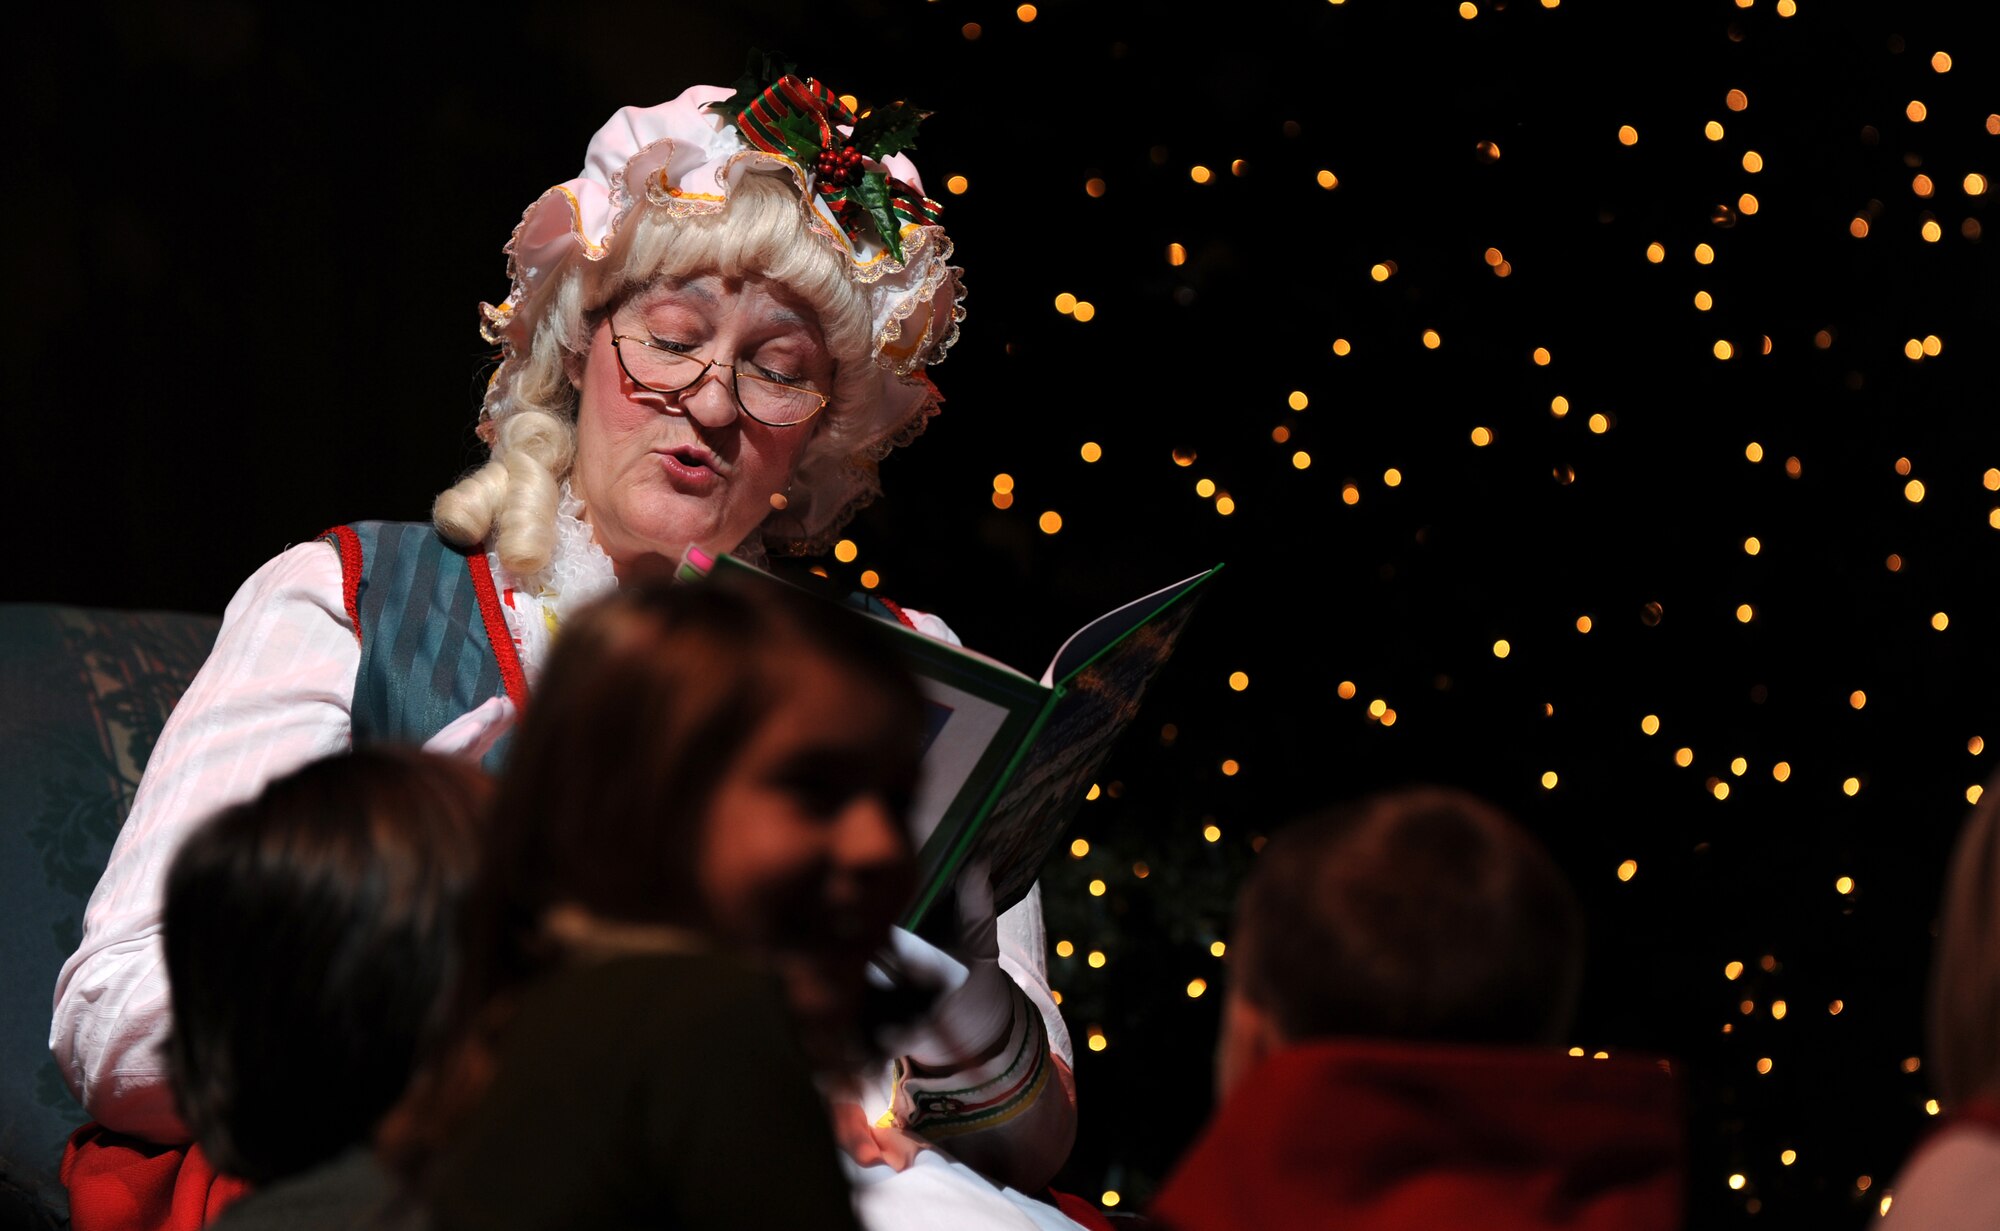 OFFUTT AIR FORCE BASE, Neb. -- Several lucky children join Mrs. Clause on the Holland Perfroming Arts Center stage Dec. 12 as part of the annual Heartland of America Band's holiday concert while she read them "Why Christmas Trees Aren't Perfect."  The Heartland of America Band performed to a full capacity audience of roughly 2,000 metro area residence as part of a four day concert series.

U.S. Air Force Photo by Josh Plueger